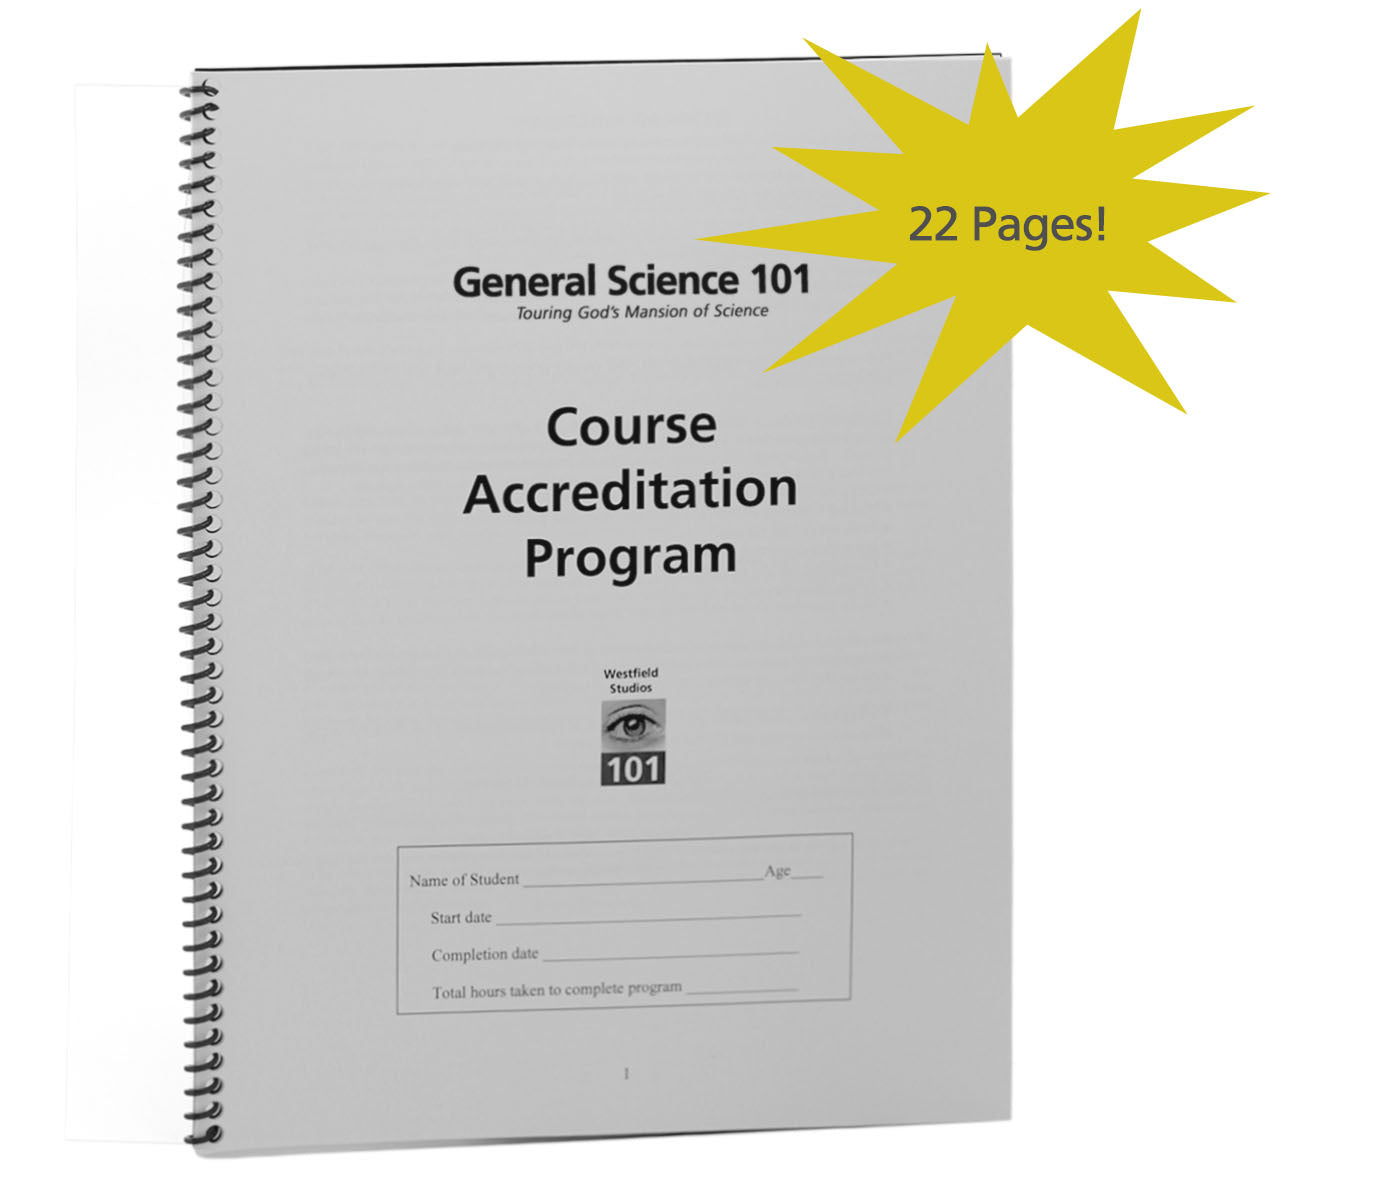 General Science 101 Course Accreditation Program